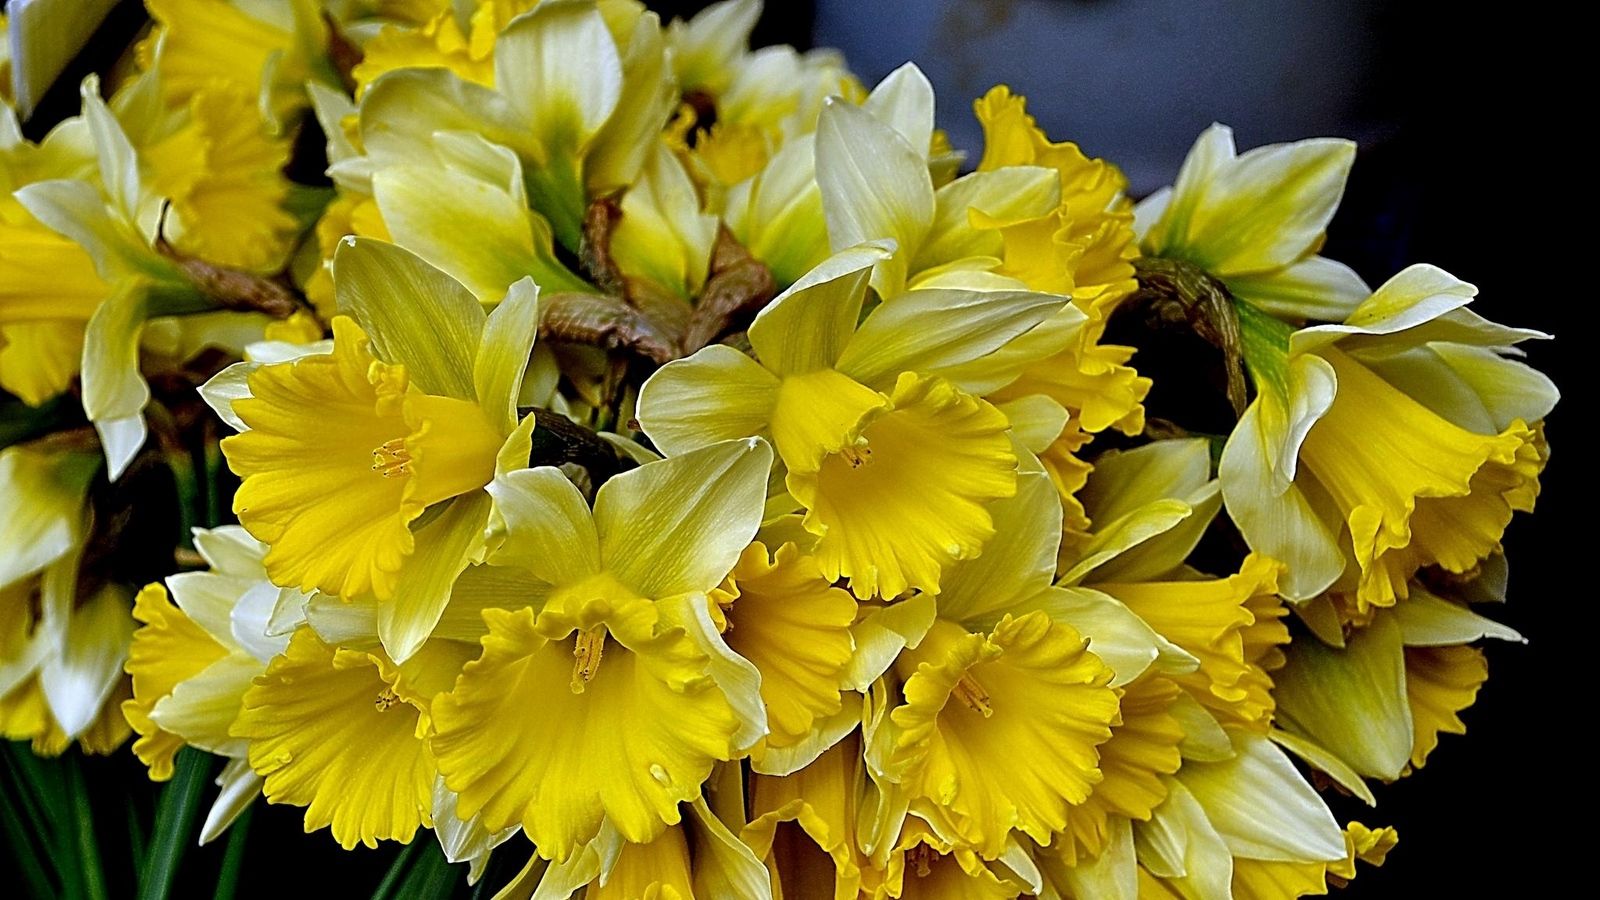 Download wallpaper 1600x900 daffodils, flowers, flower, yellow